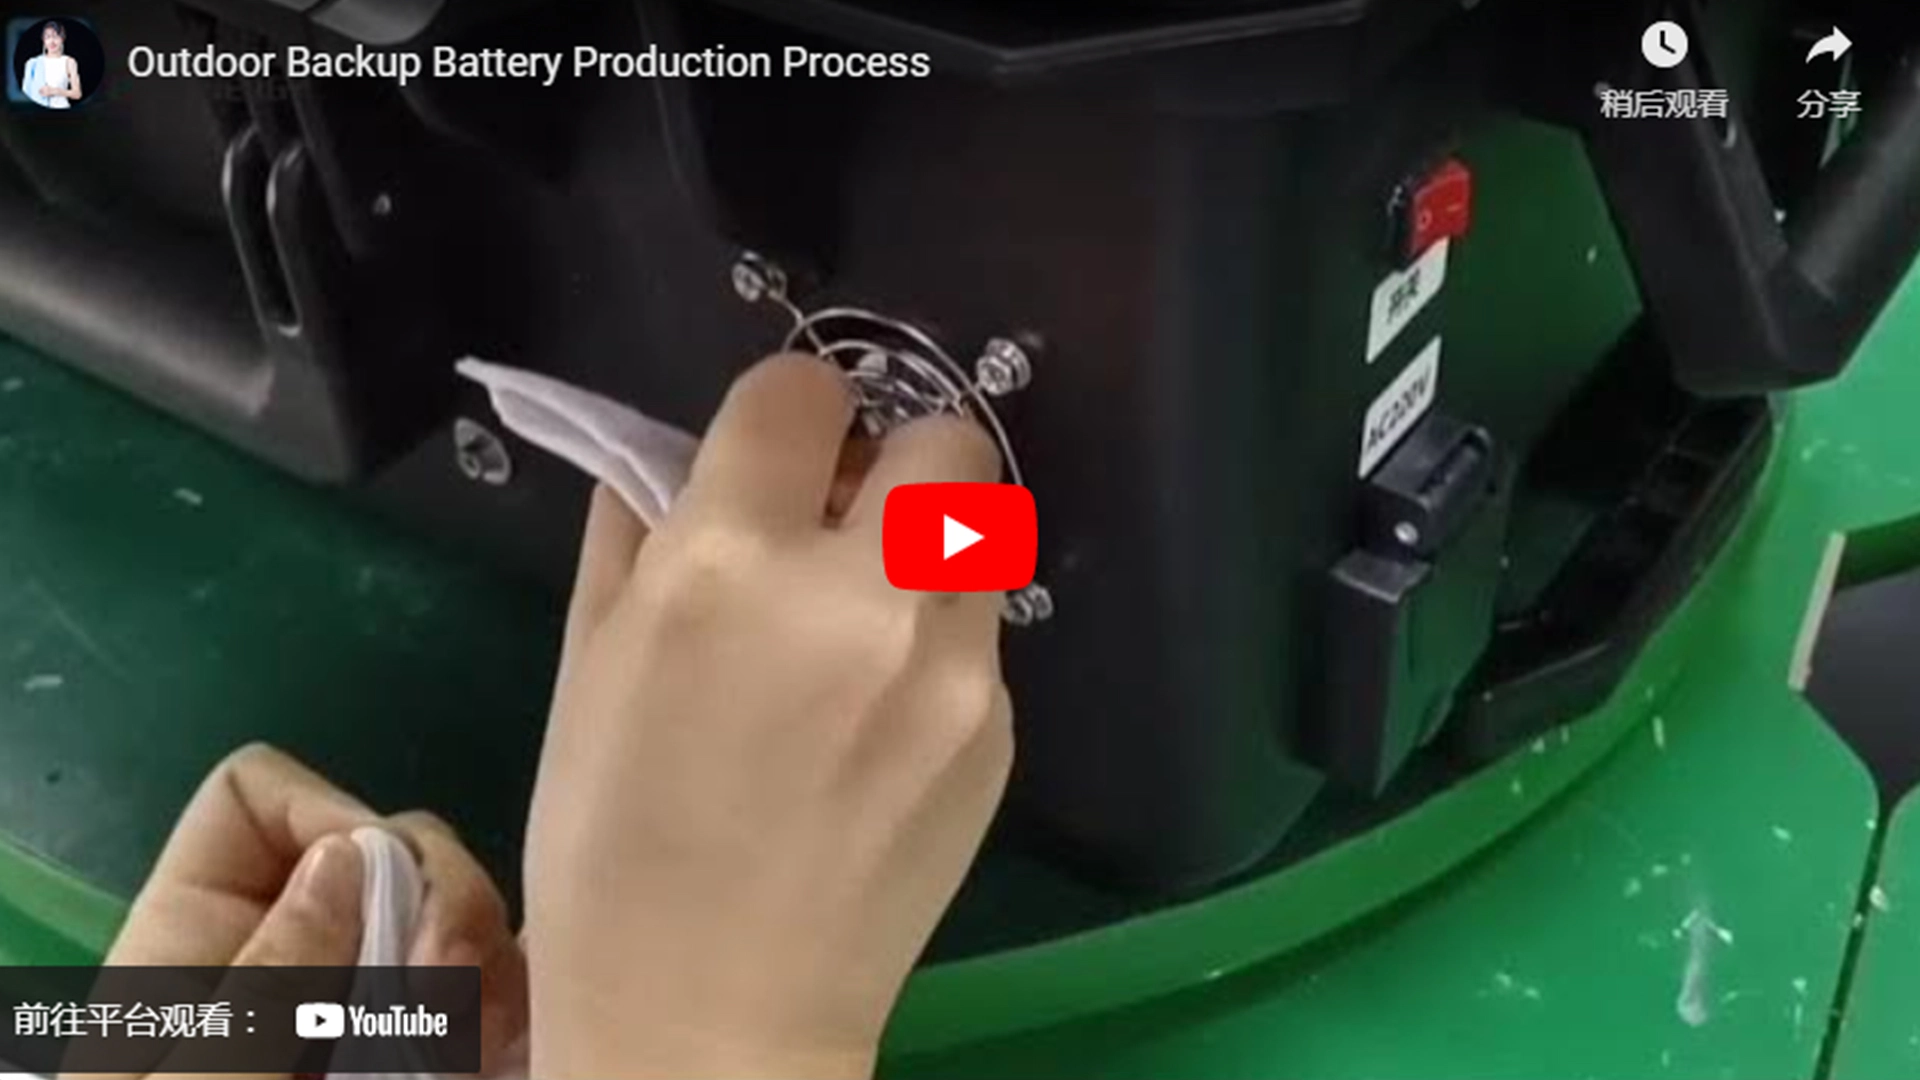 Outdoor Backup Battery Production Process